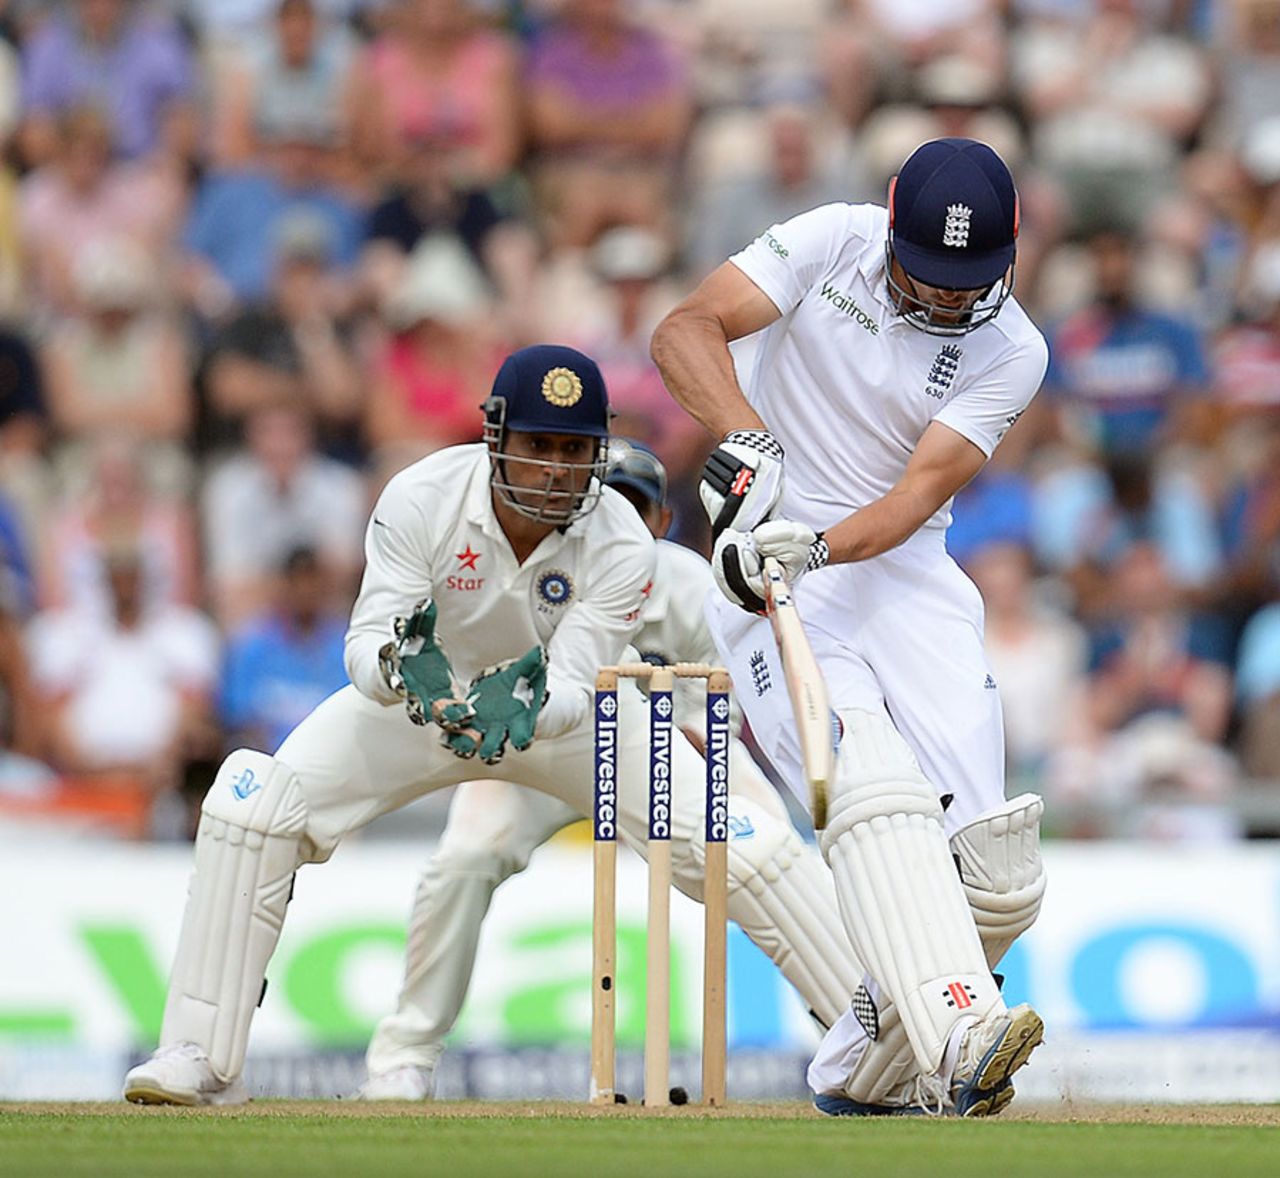 Five short of a century, Alastair Cook nicked one down the leg side, England v India, 3rd Investec Test, Ageas Bowl, 1st day, July 27, 2014